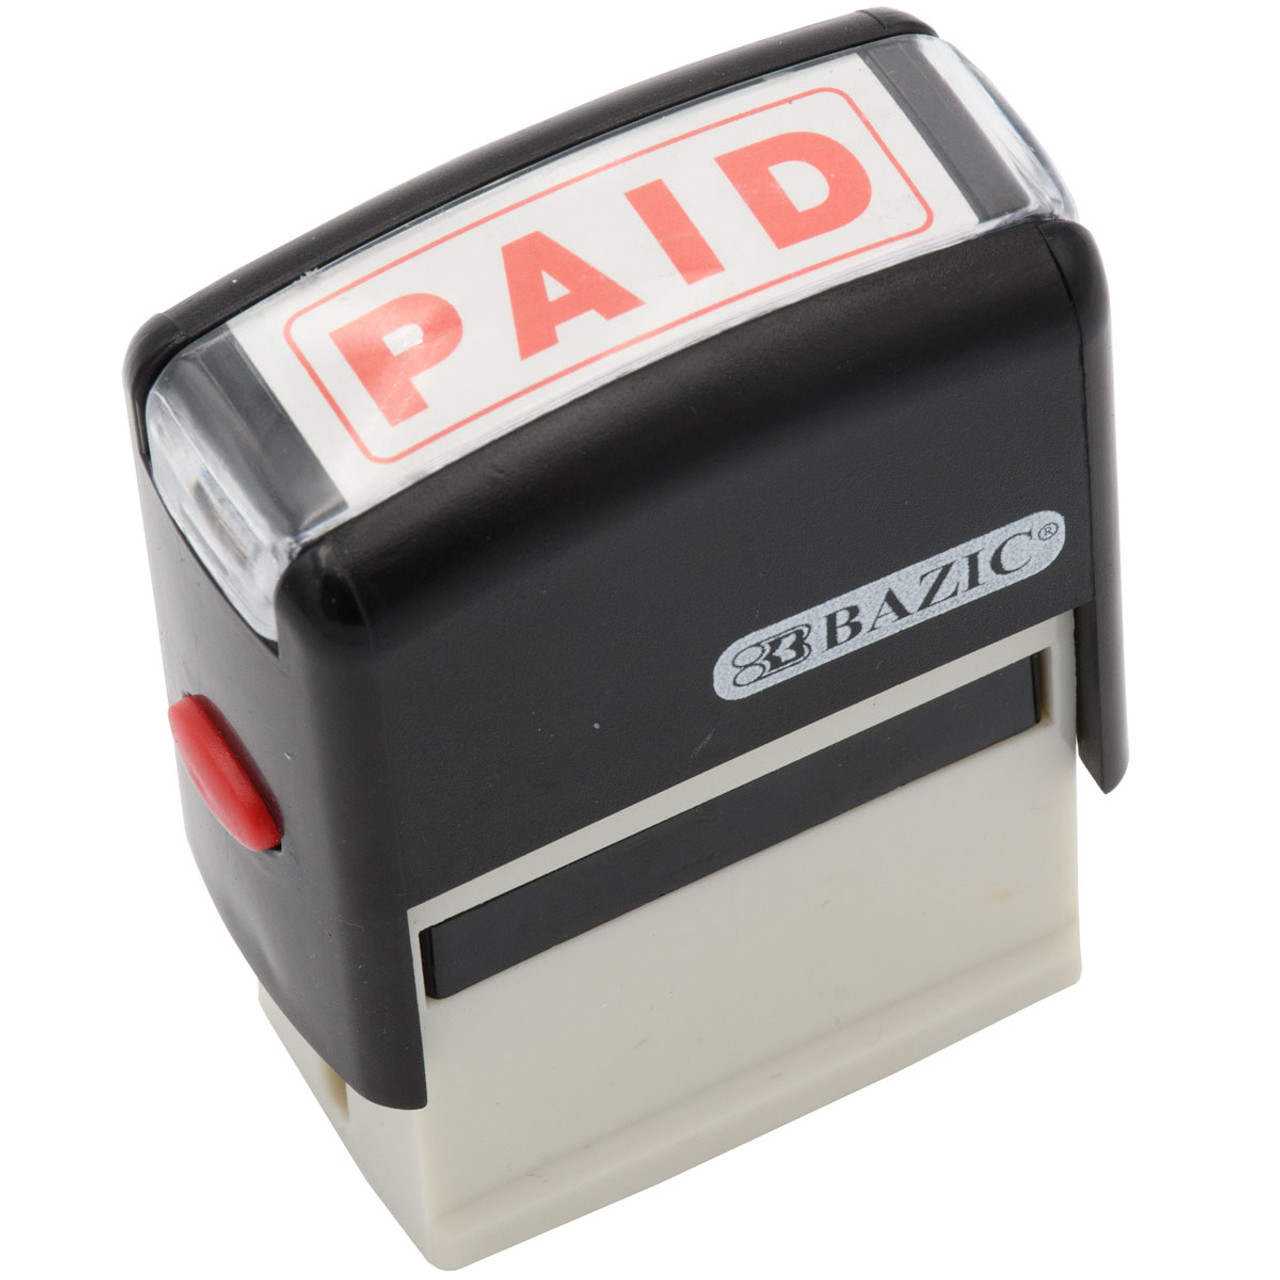 Traditional Solid Star Self-Inking Stamp